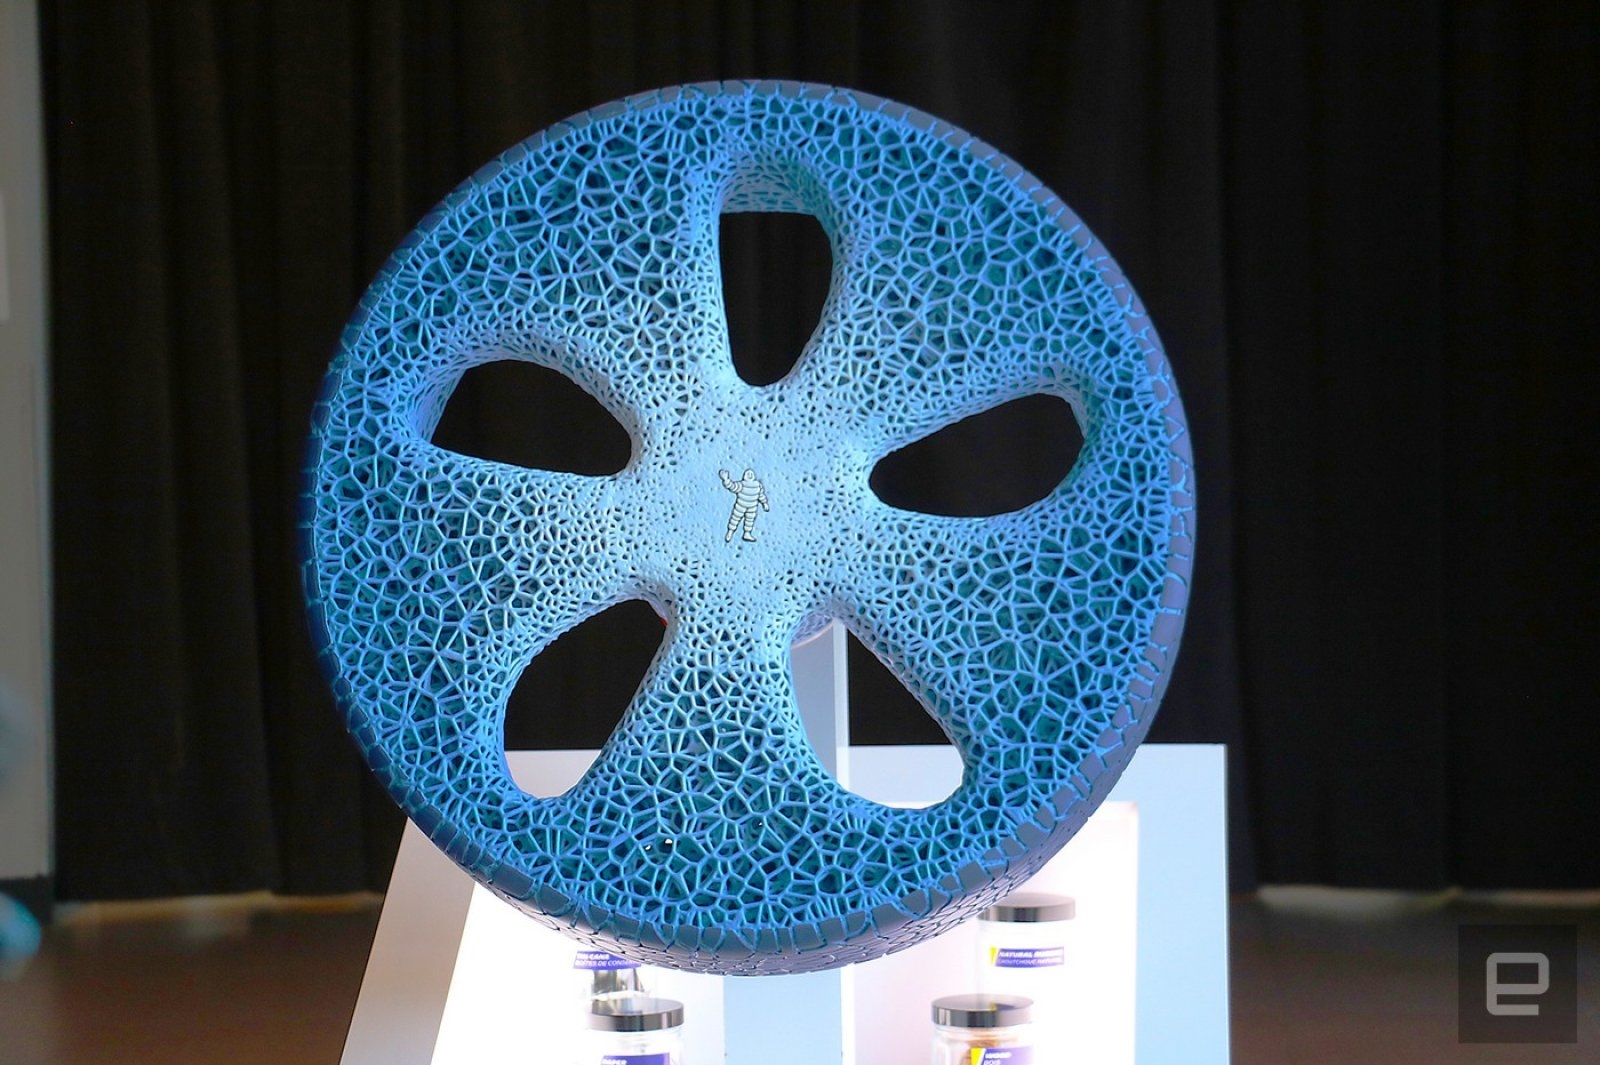 Michelin’s 3D-printed tire is as stunning as it is futuristic | DeviceDaily.com